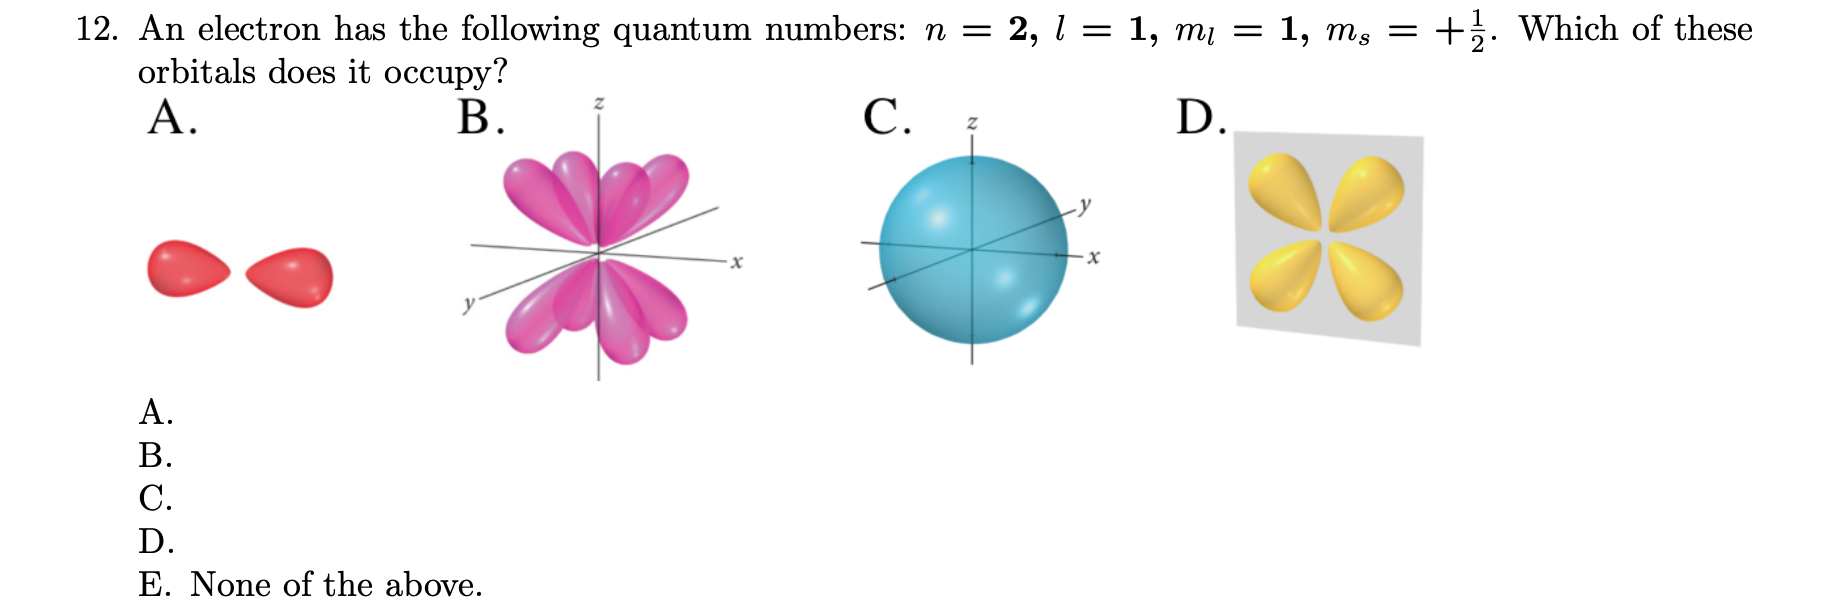 12. An electron has the following quantum numbers: n =
orbitals does it occupy?
A.
+. Which of these
2, l = 1, m = 1, ms =
C.
D.
B.
A.
B.
C.
D.
E. None of the above.
